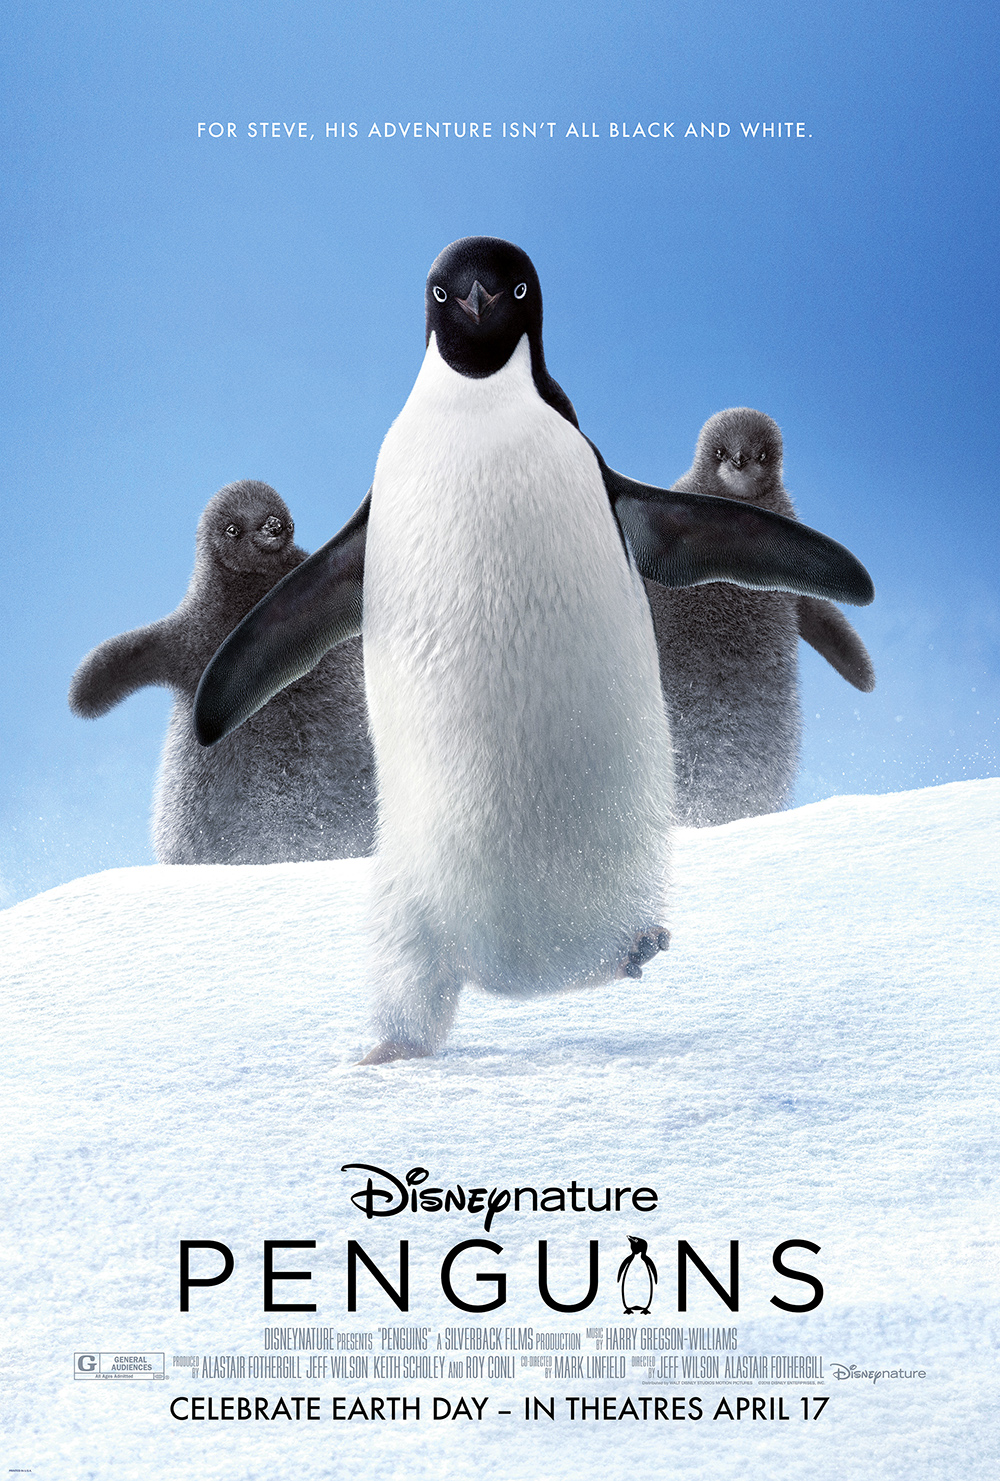 Disneynature Releases First Poster for 2019 Film "Penguins" - AllEars.Net